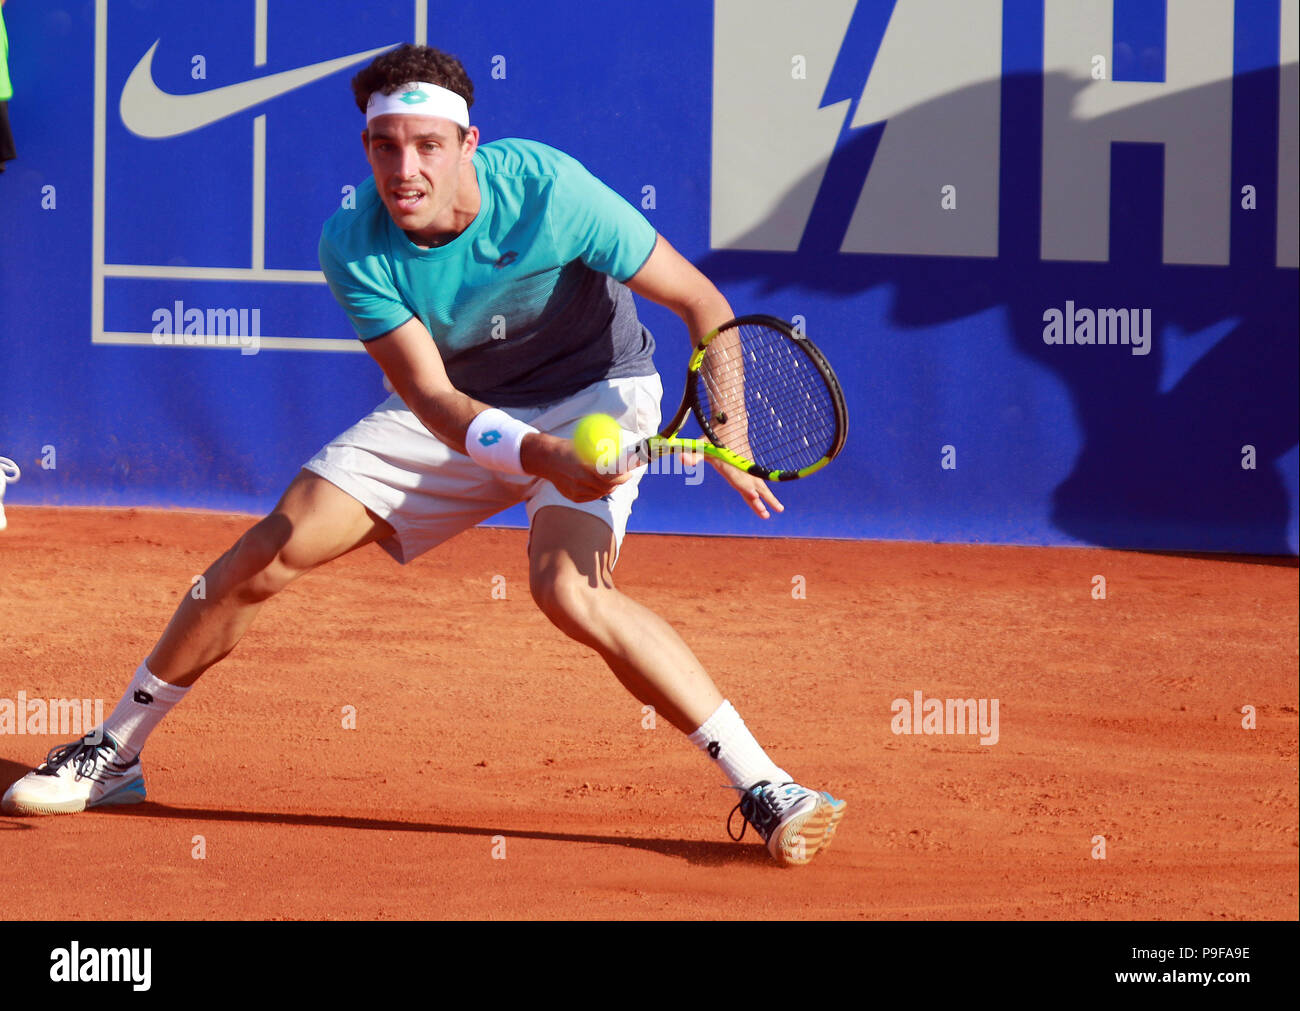 Umag, Croatia. 18th July 2018. CROATIA, Umag: Marco Cecchinato of Italy hits a return to Jiri Vesely during the singles match Vesely v Cecchinato at the ATP 29th Plava laguna Croatia Open Umag tournament at the at the Goran Ivanisevic ATP Stadium, on July 18, 2018 in Umag. Credit: Andrea Spinelli/Alamy Live News Stock Photo